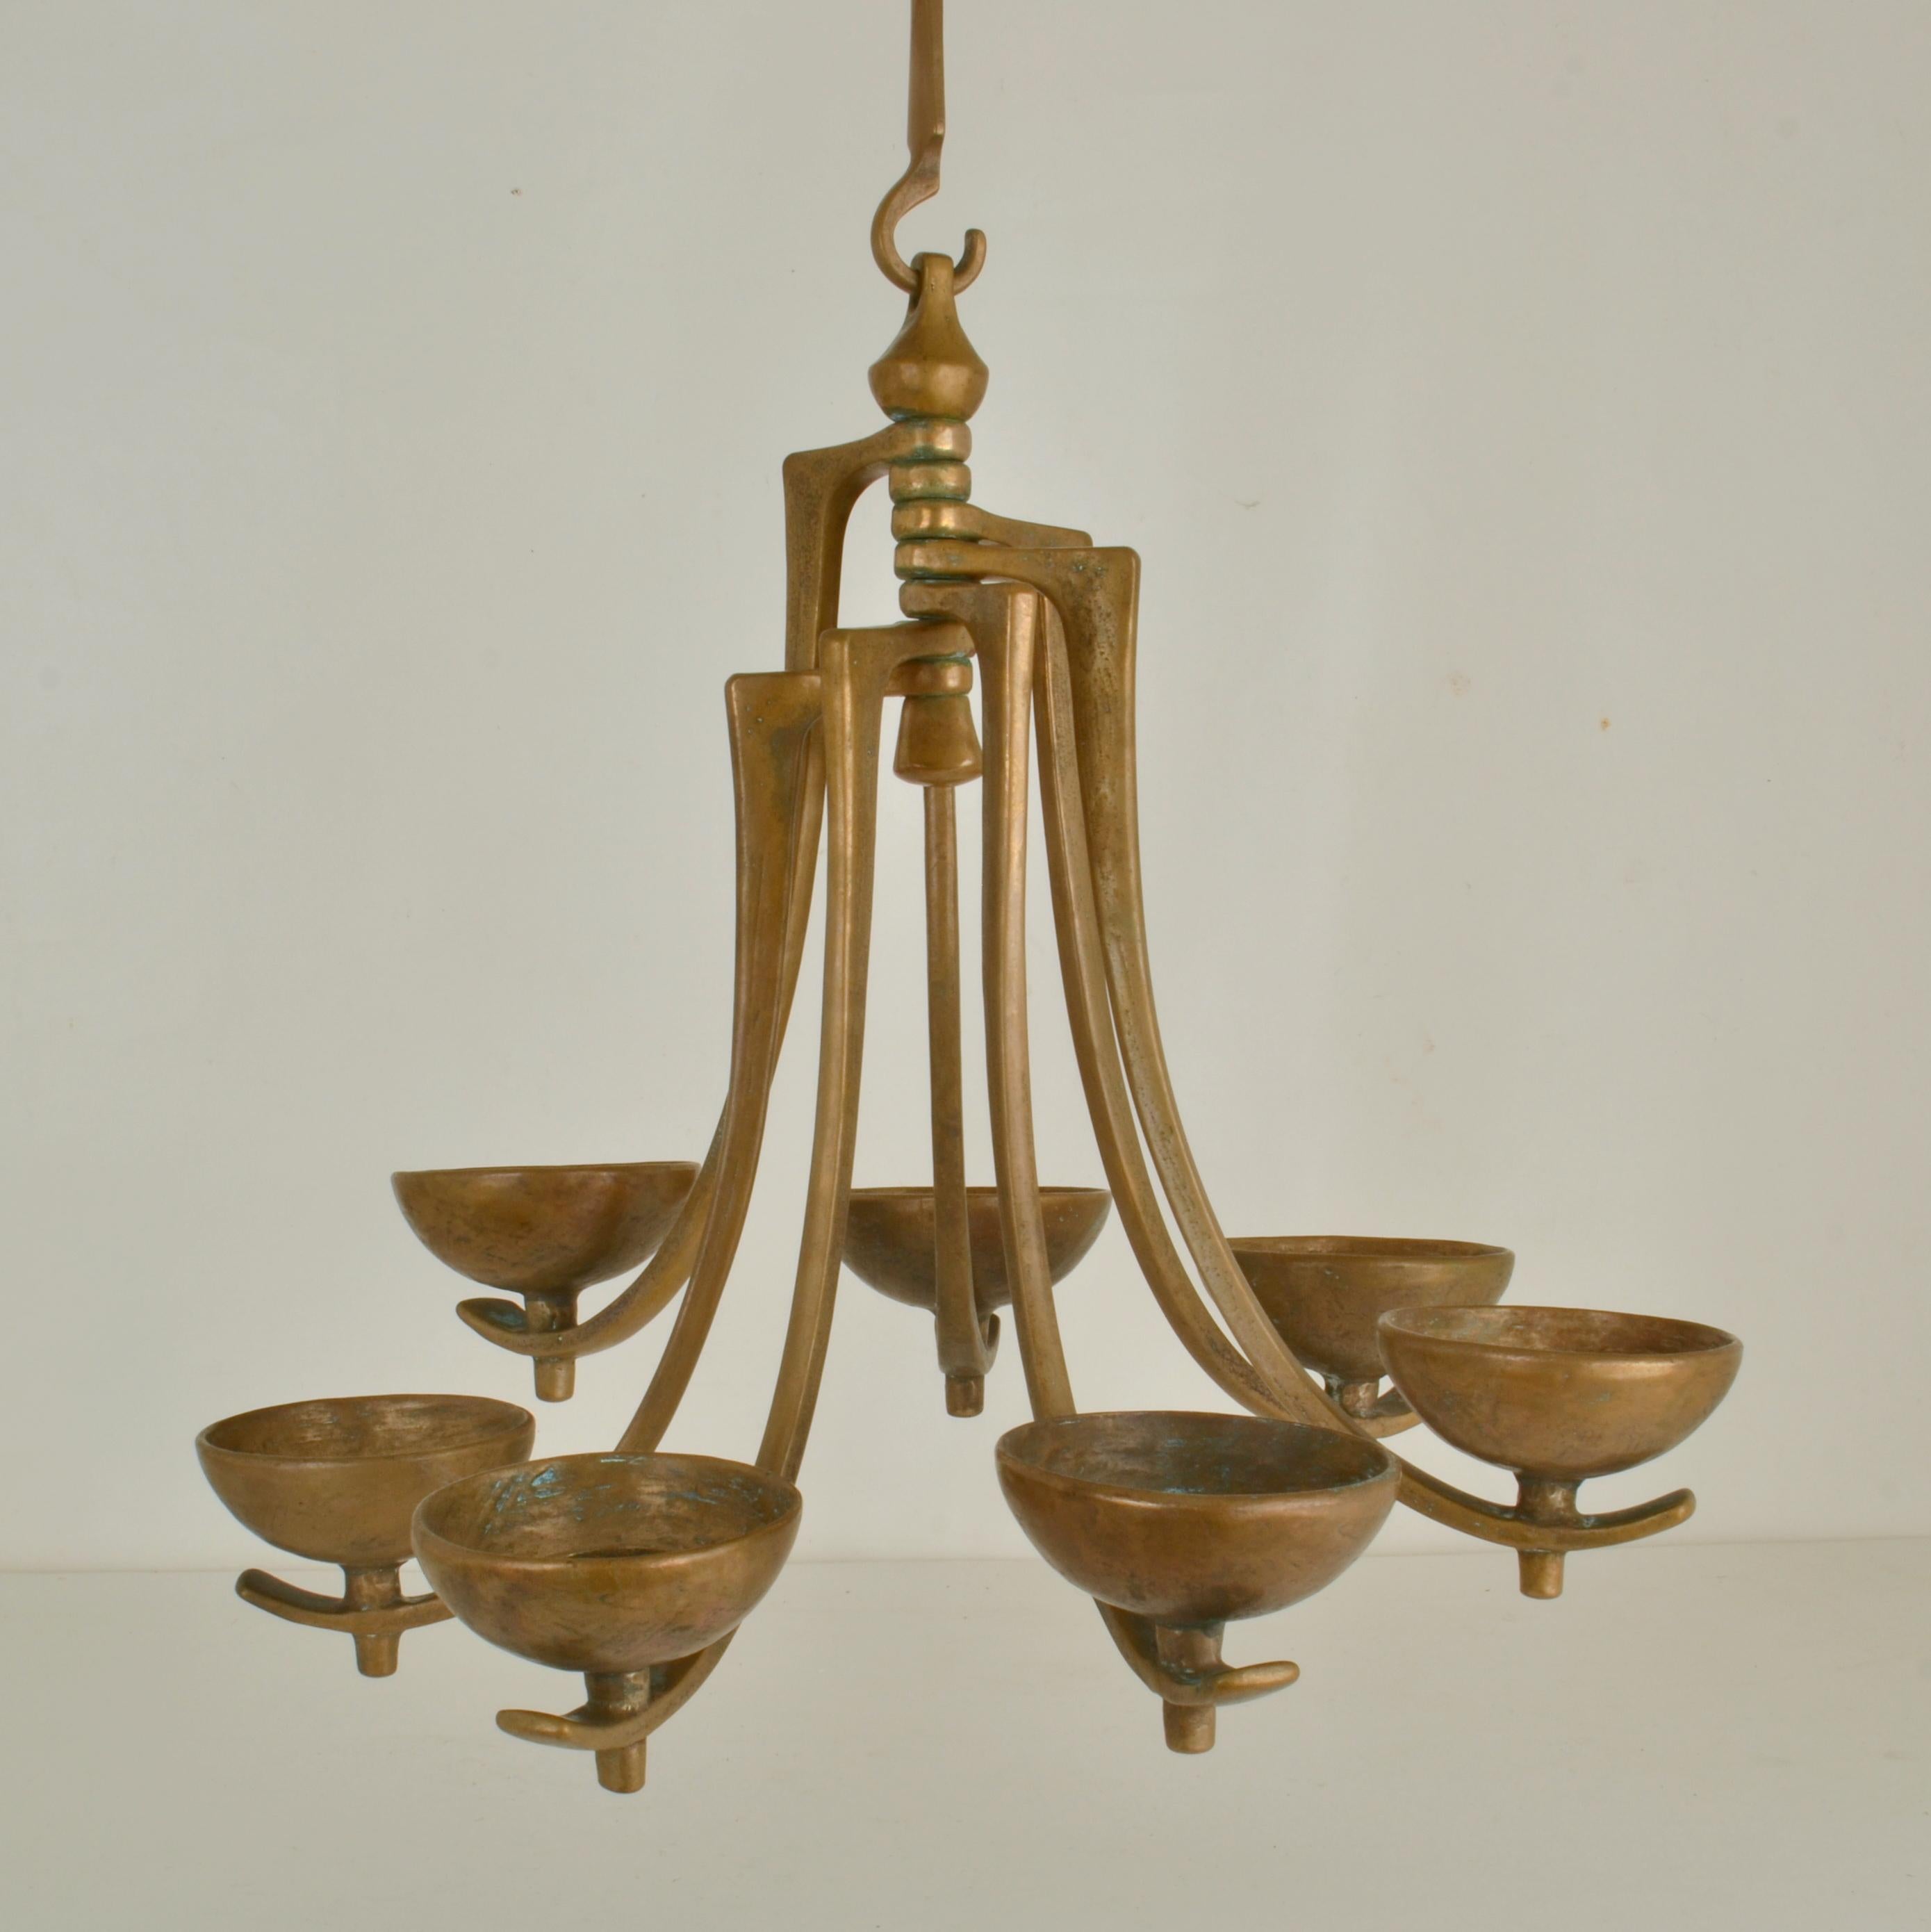 Bronze cast candelabra composed of seven radiating cast-bronze arms which hold a 5 cm diameter candle. It is designed by Michael Harjes and produced by Harjes Metalkunst in Germany. The candle holder is in excellent condition with a beautiful deep